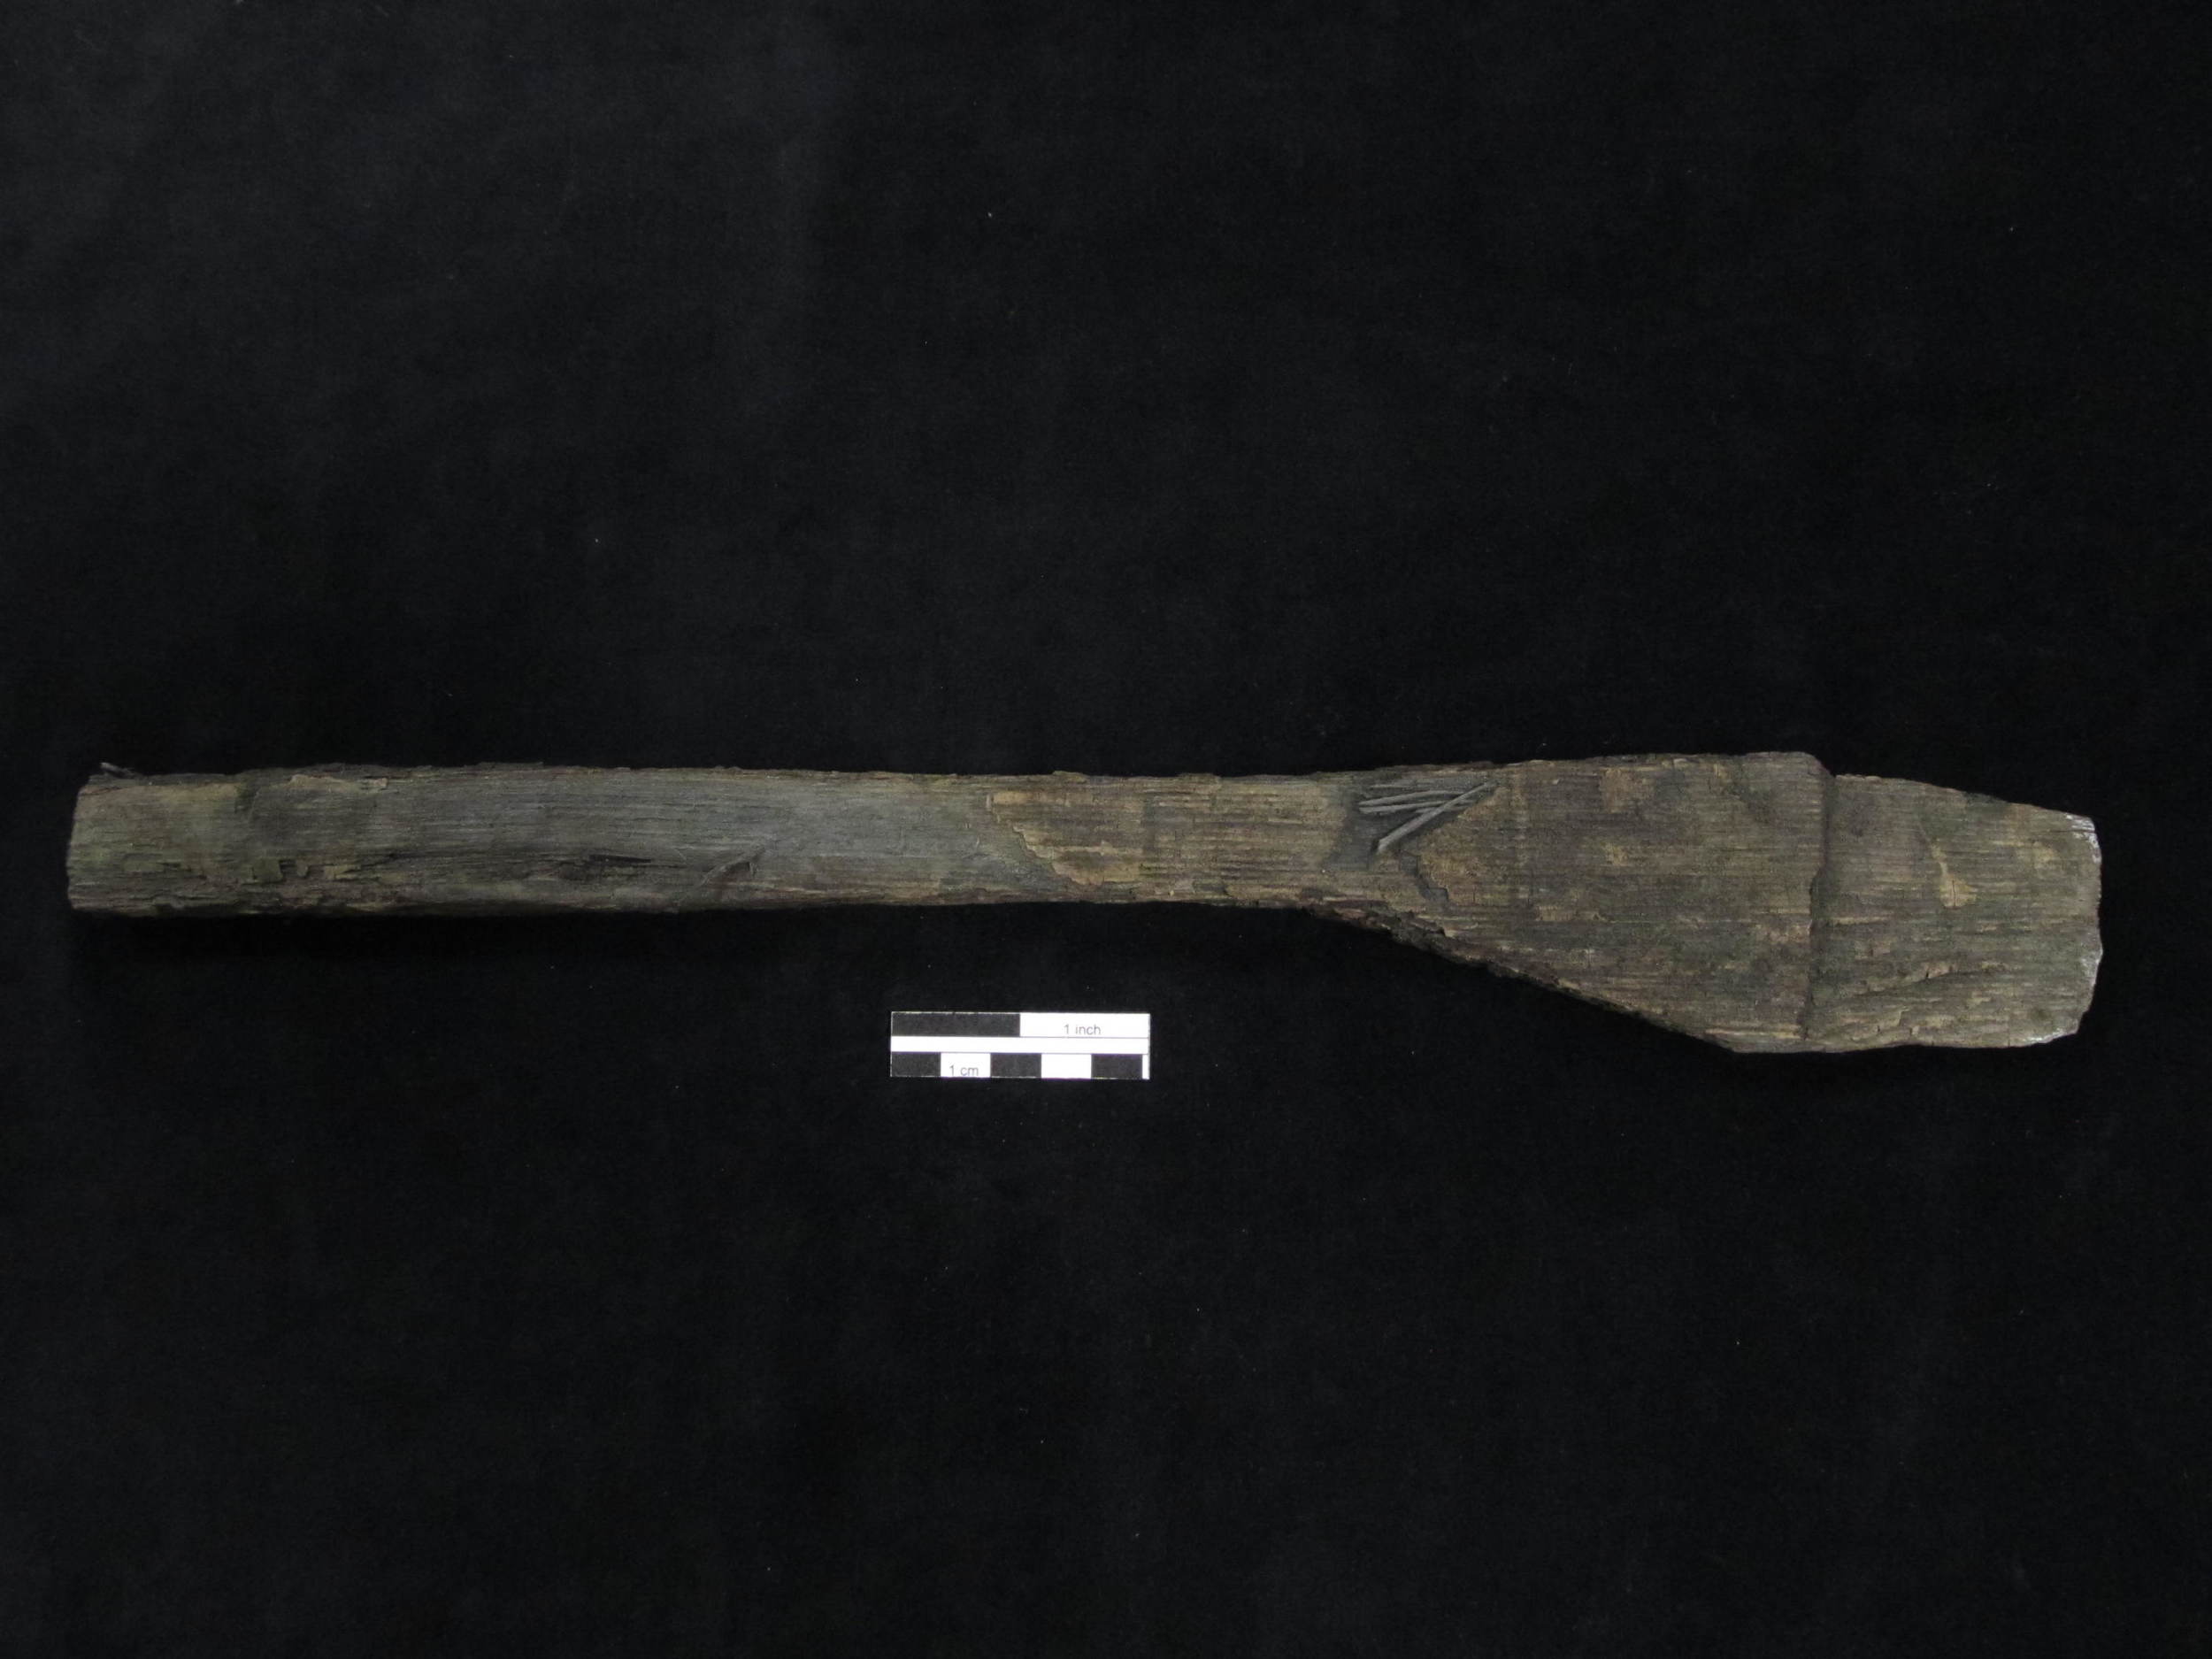  Hatchet handle fragment recovered from the Carlyle warehouse.    